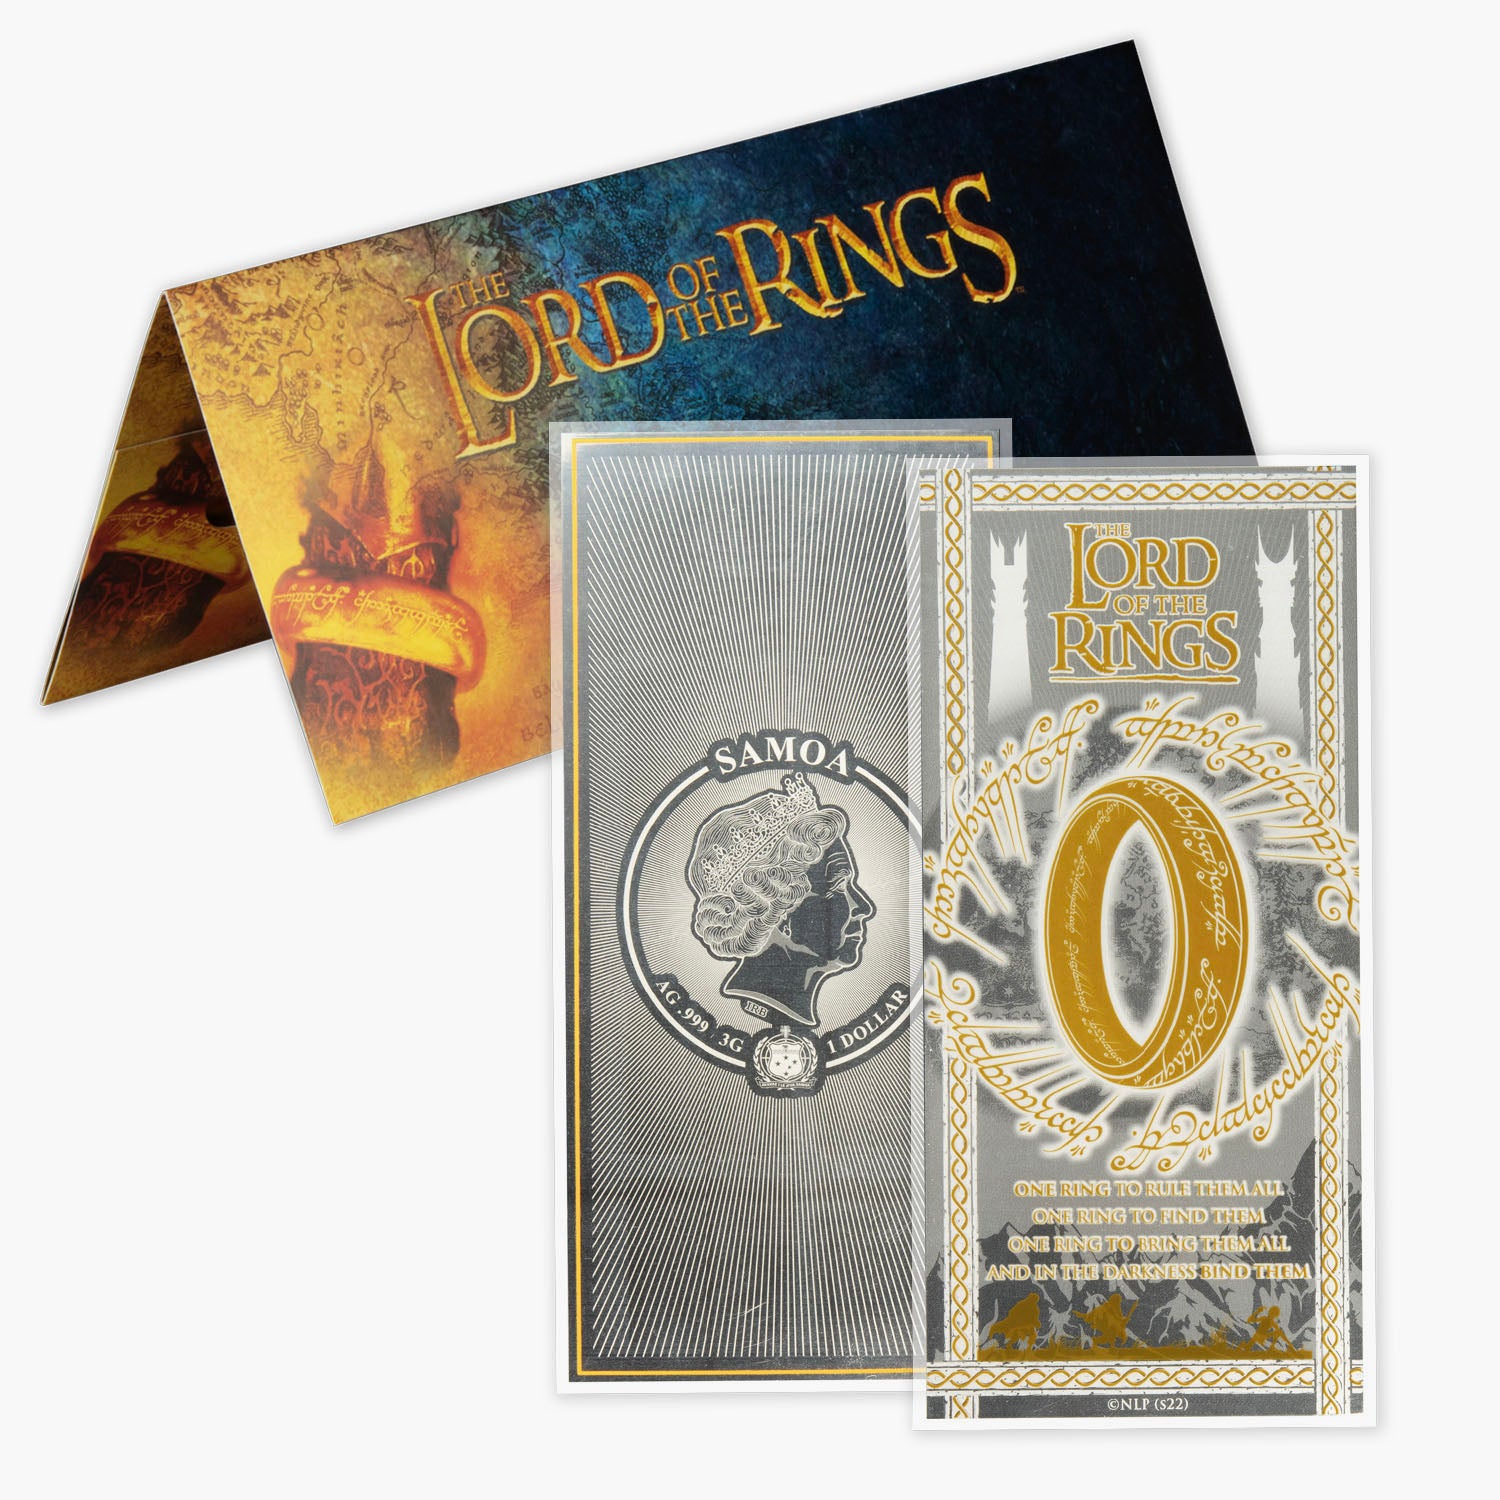 The Official Lord of the Rings Pure Silver Legal Tender Note